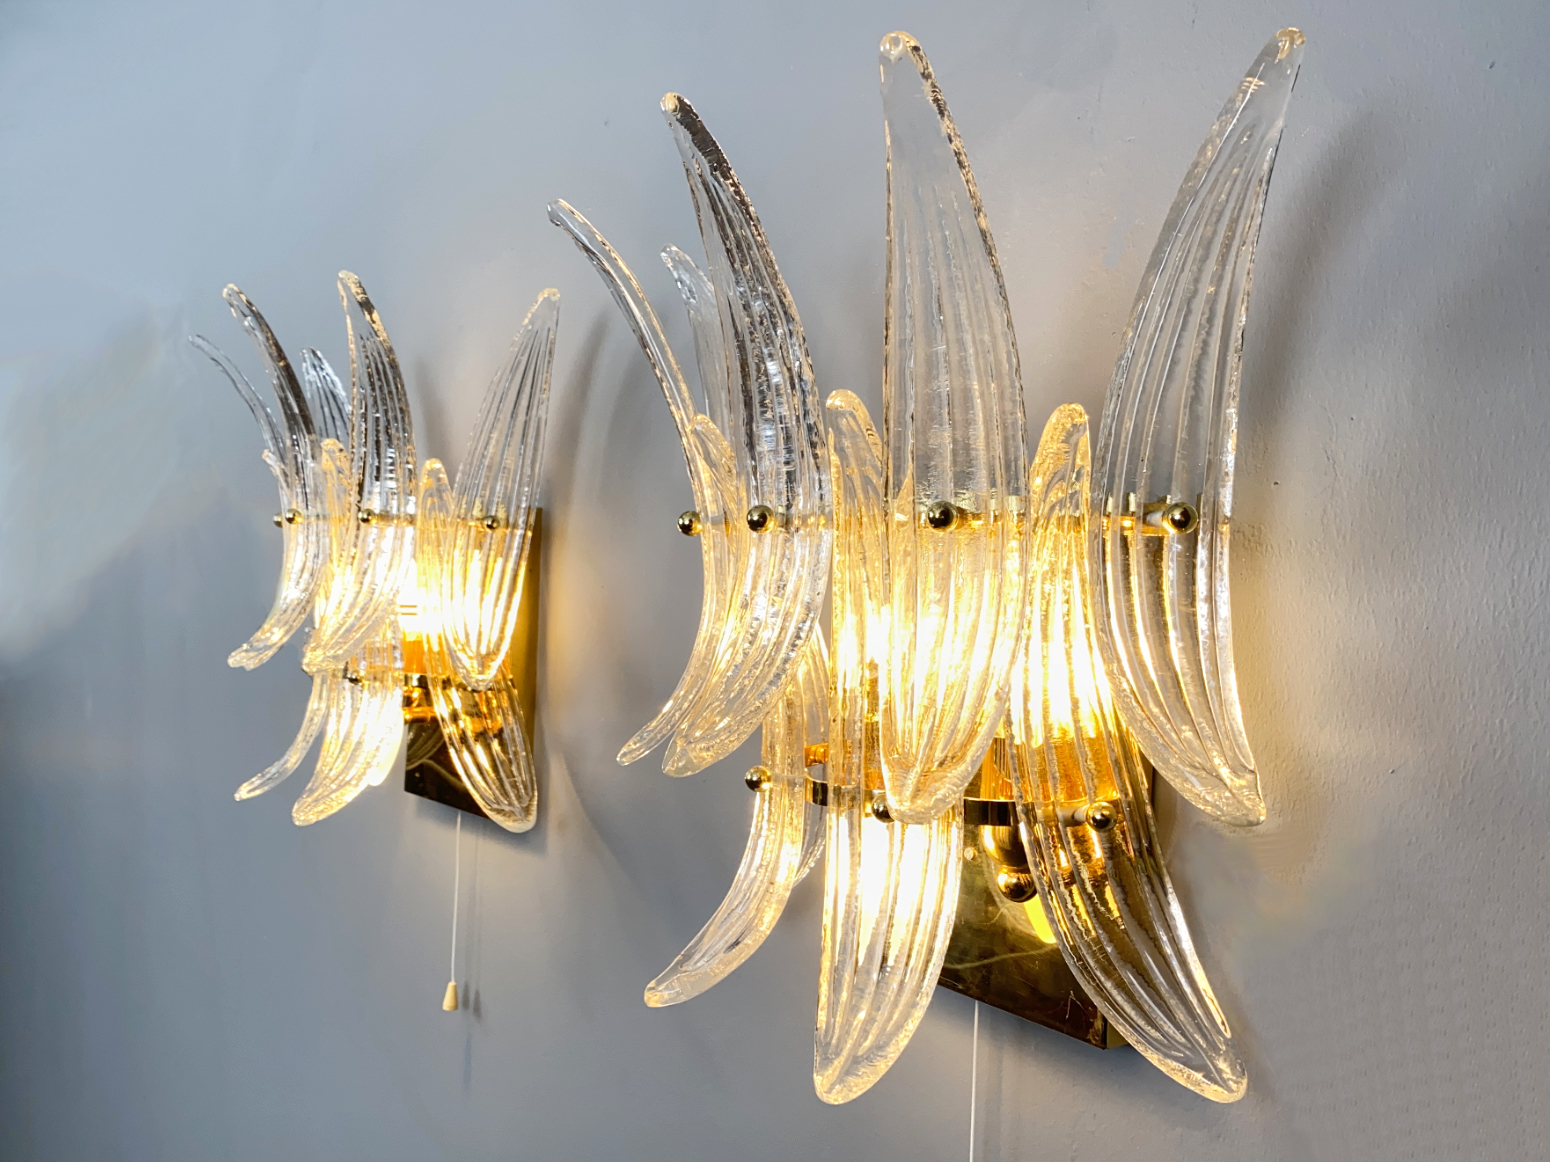 Pair of Palmette Sconces / Wall Lamps by J.T. Kalmar Vienna and Glass by Barovier & Toso, Murano, Italy, 1970s.  Each Sconce has 9 Murano Glass Palm Leaves.